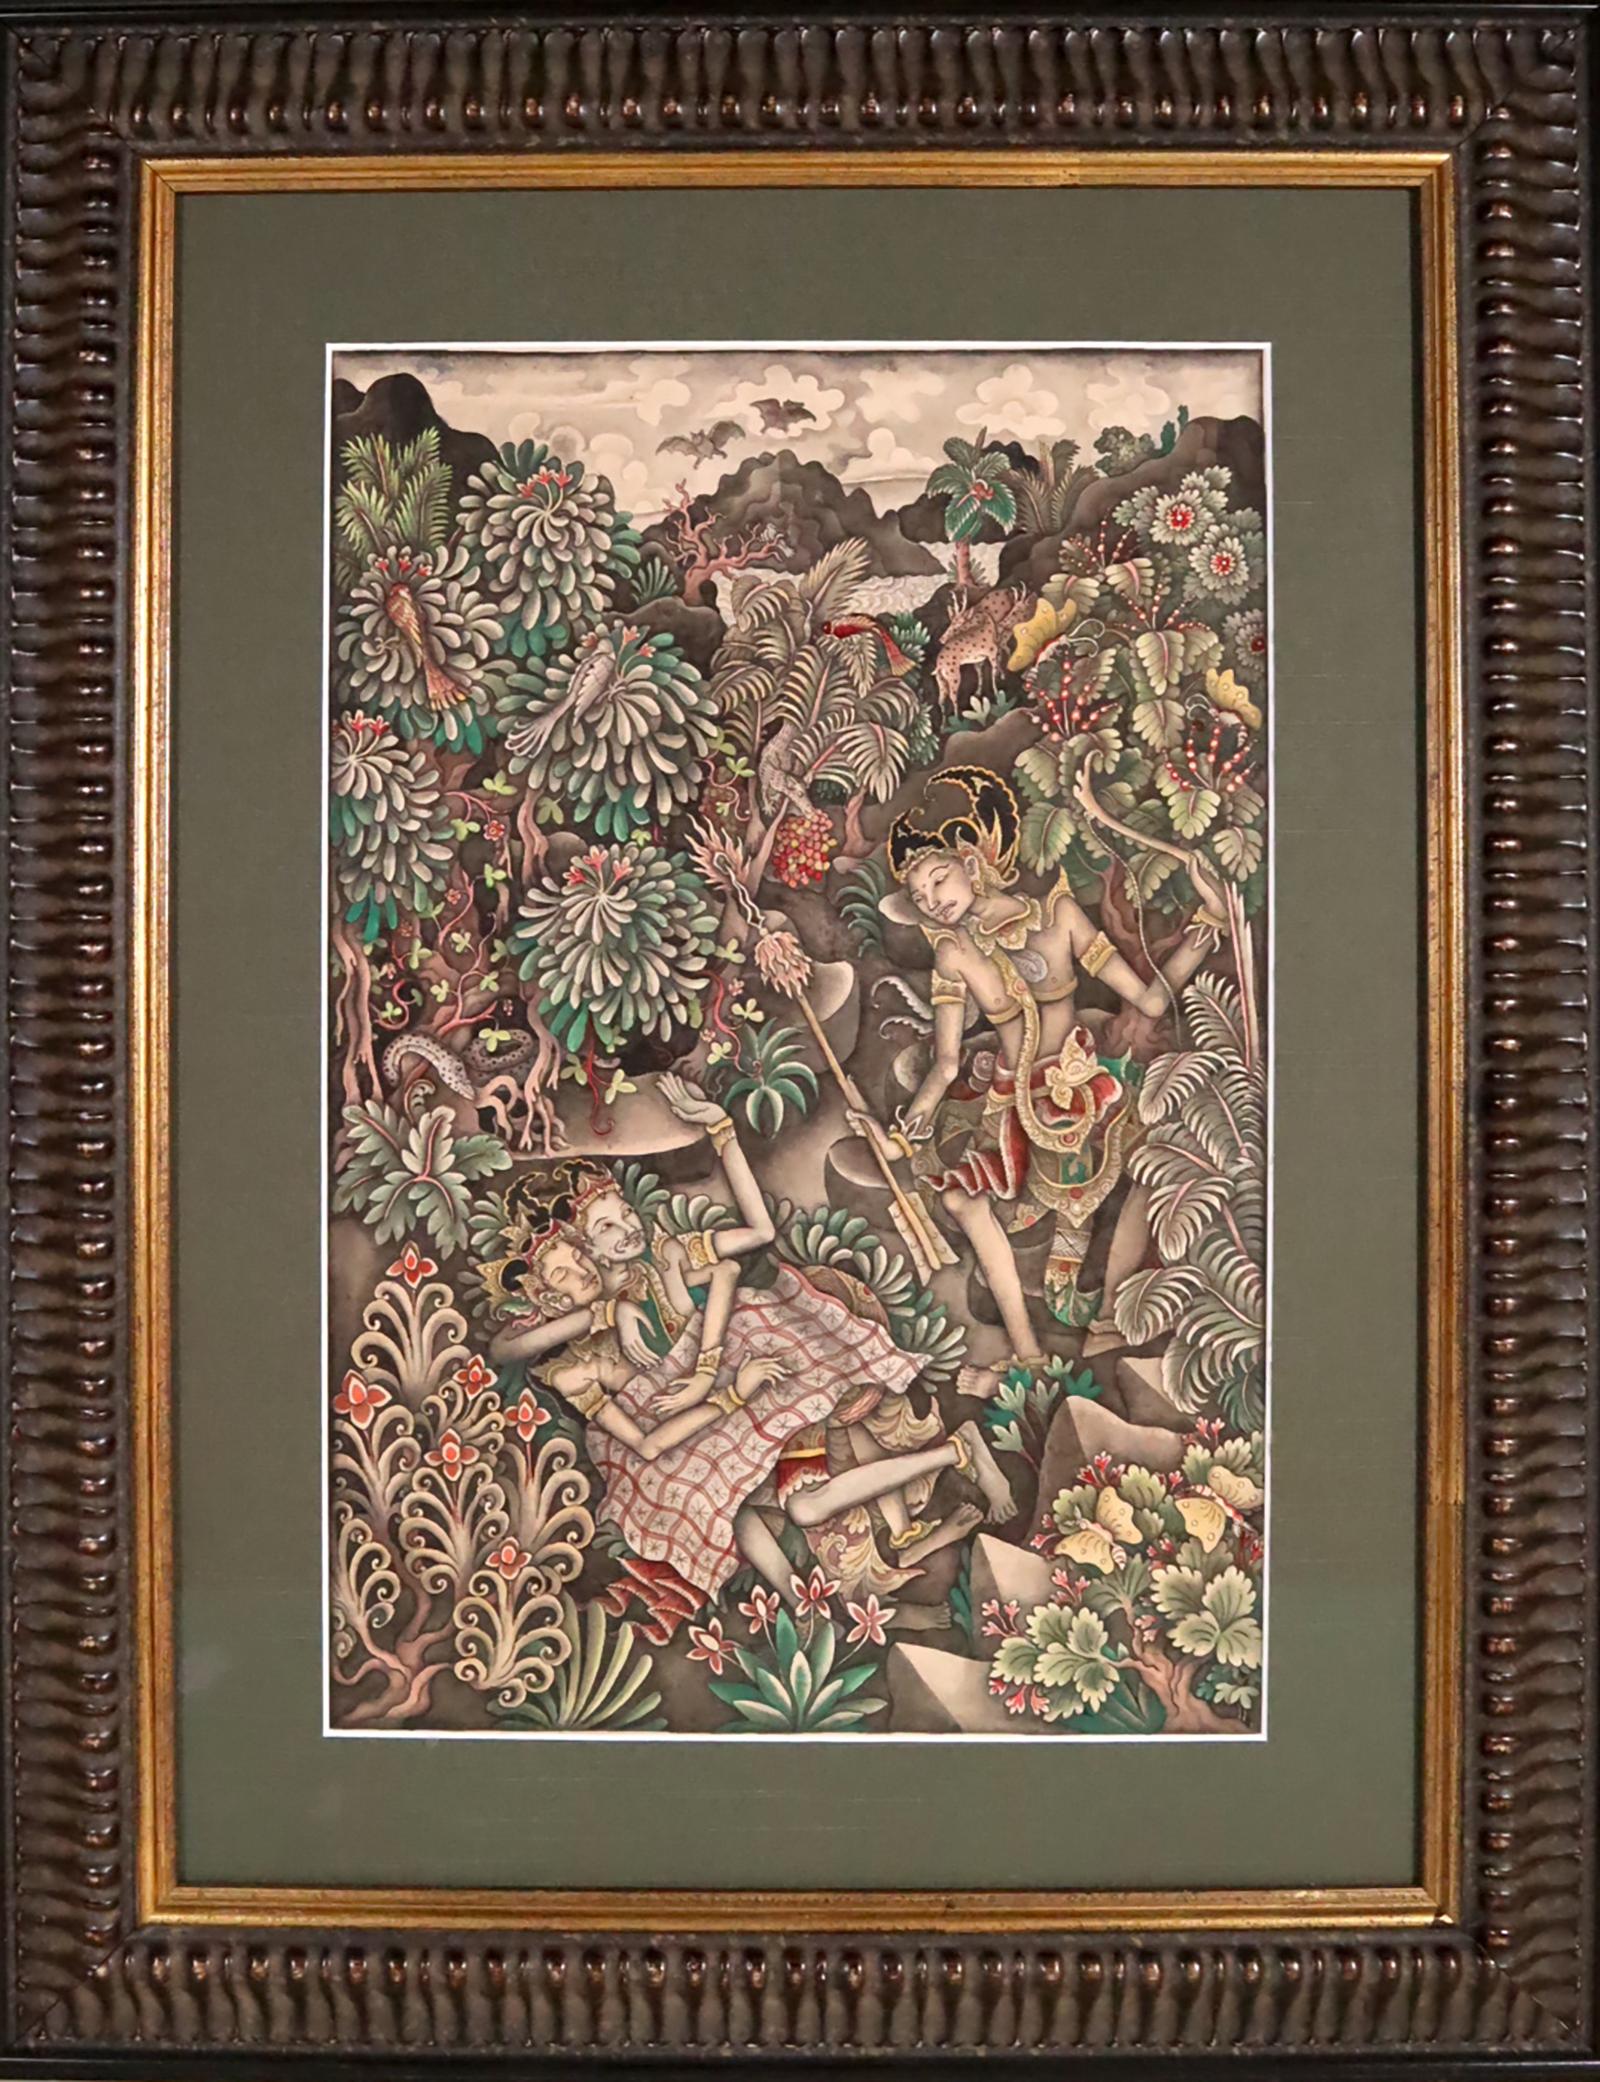 Unknown Landscape Art - Balinese painting forest with Rama Sita Bali Indonesia INVENTORY CLEARANCE SALE